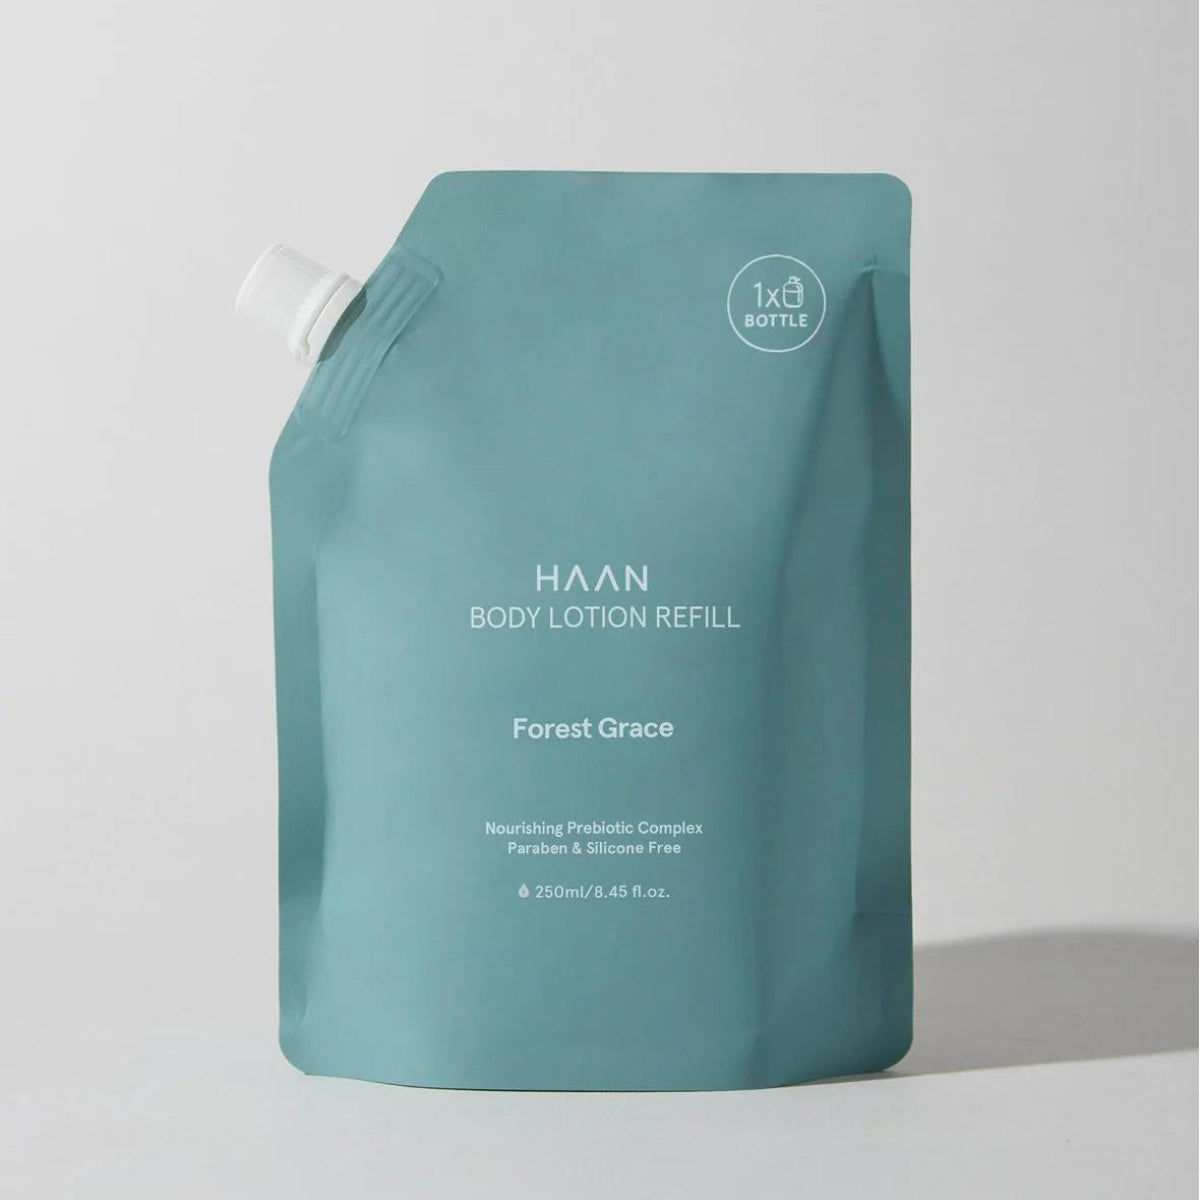 Haan Refill Body Lotion Forest Grace - 250ml